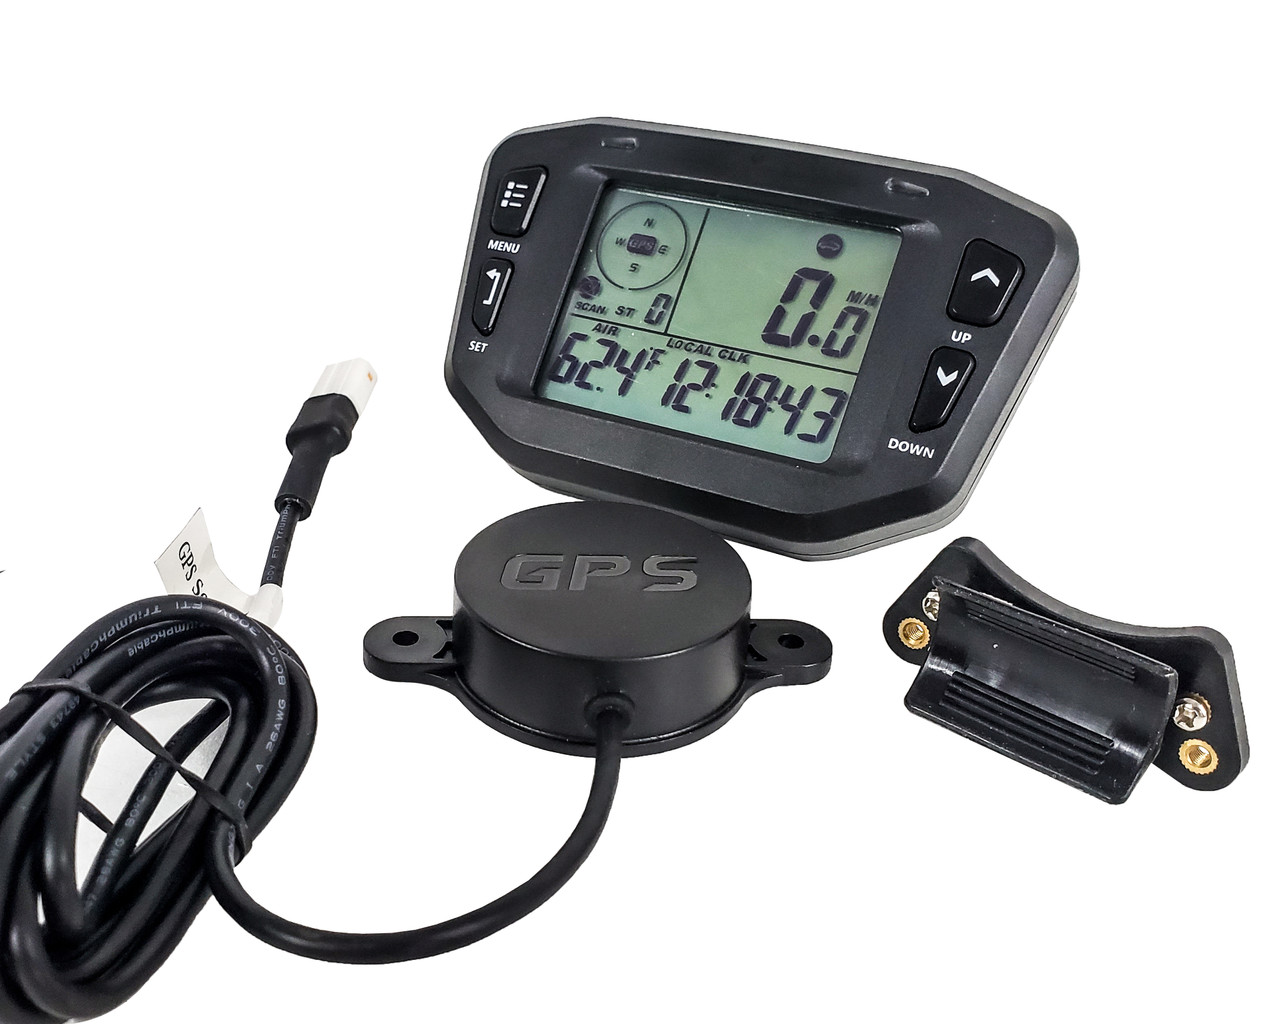 Trail Tech: Precision Speedometers, GPS, Rugged Parts for Motorcycles,  ATVs, Off-Road